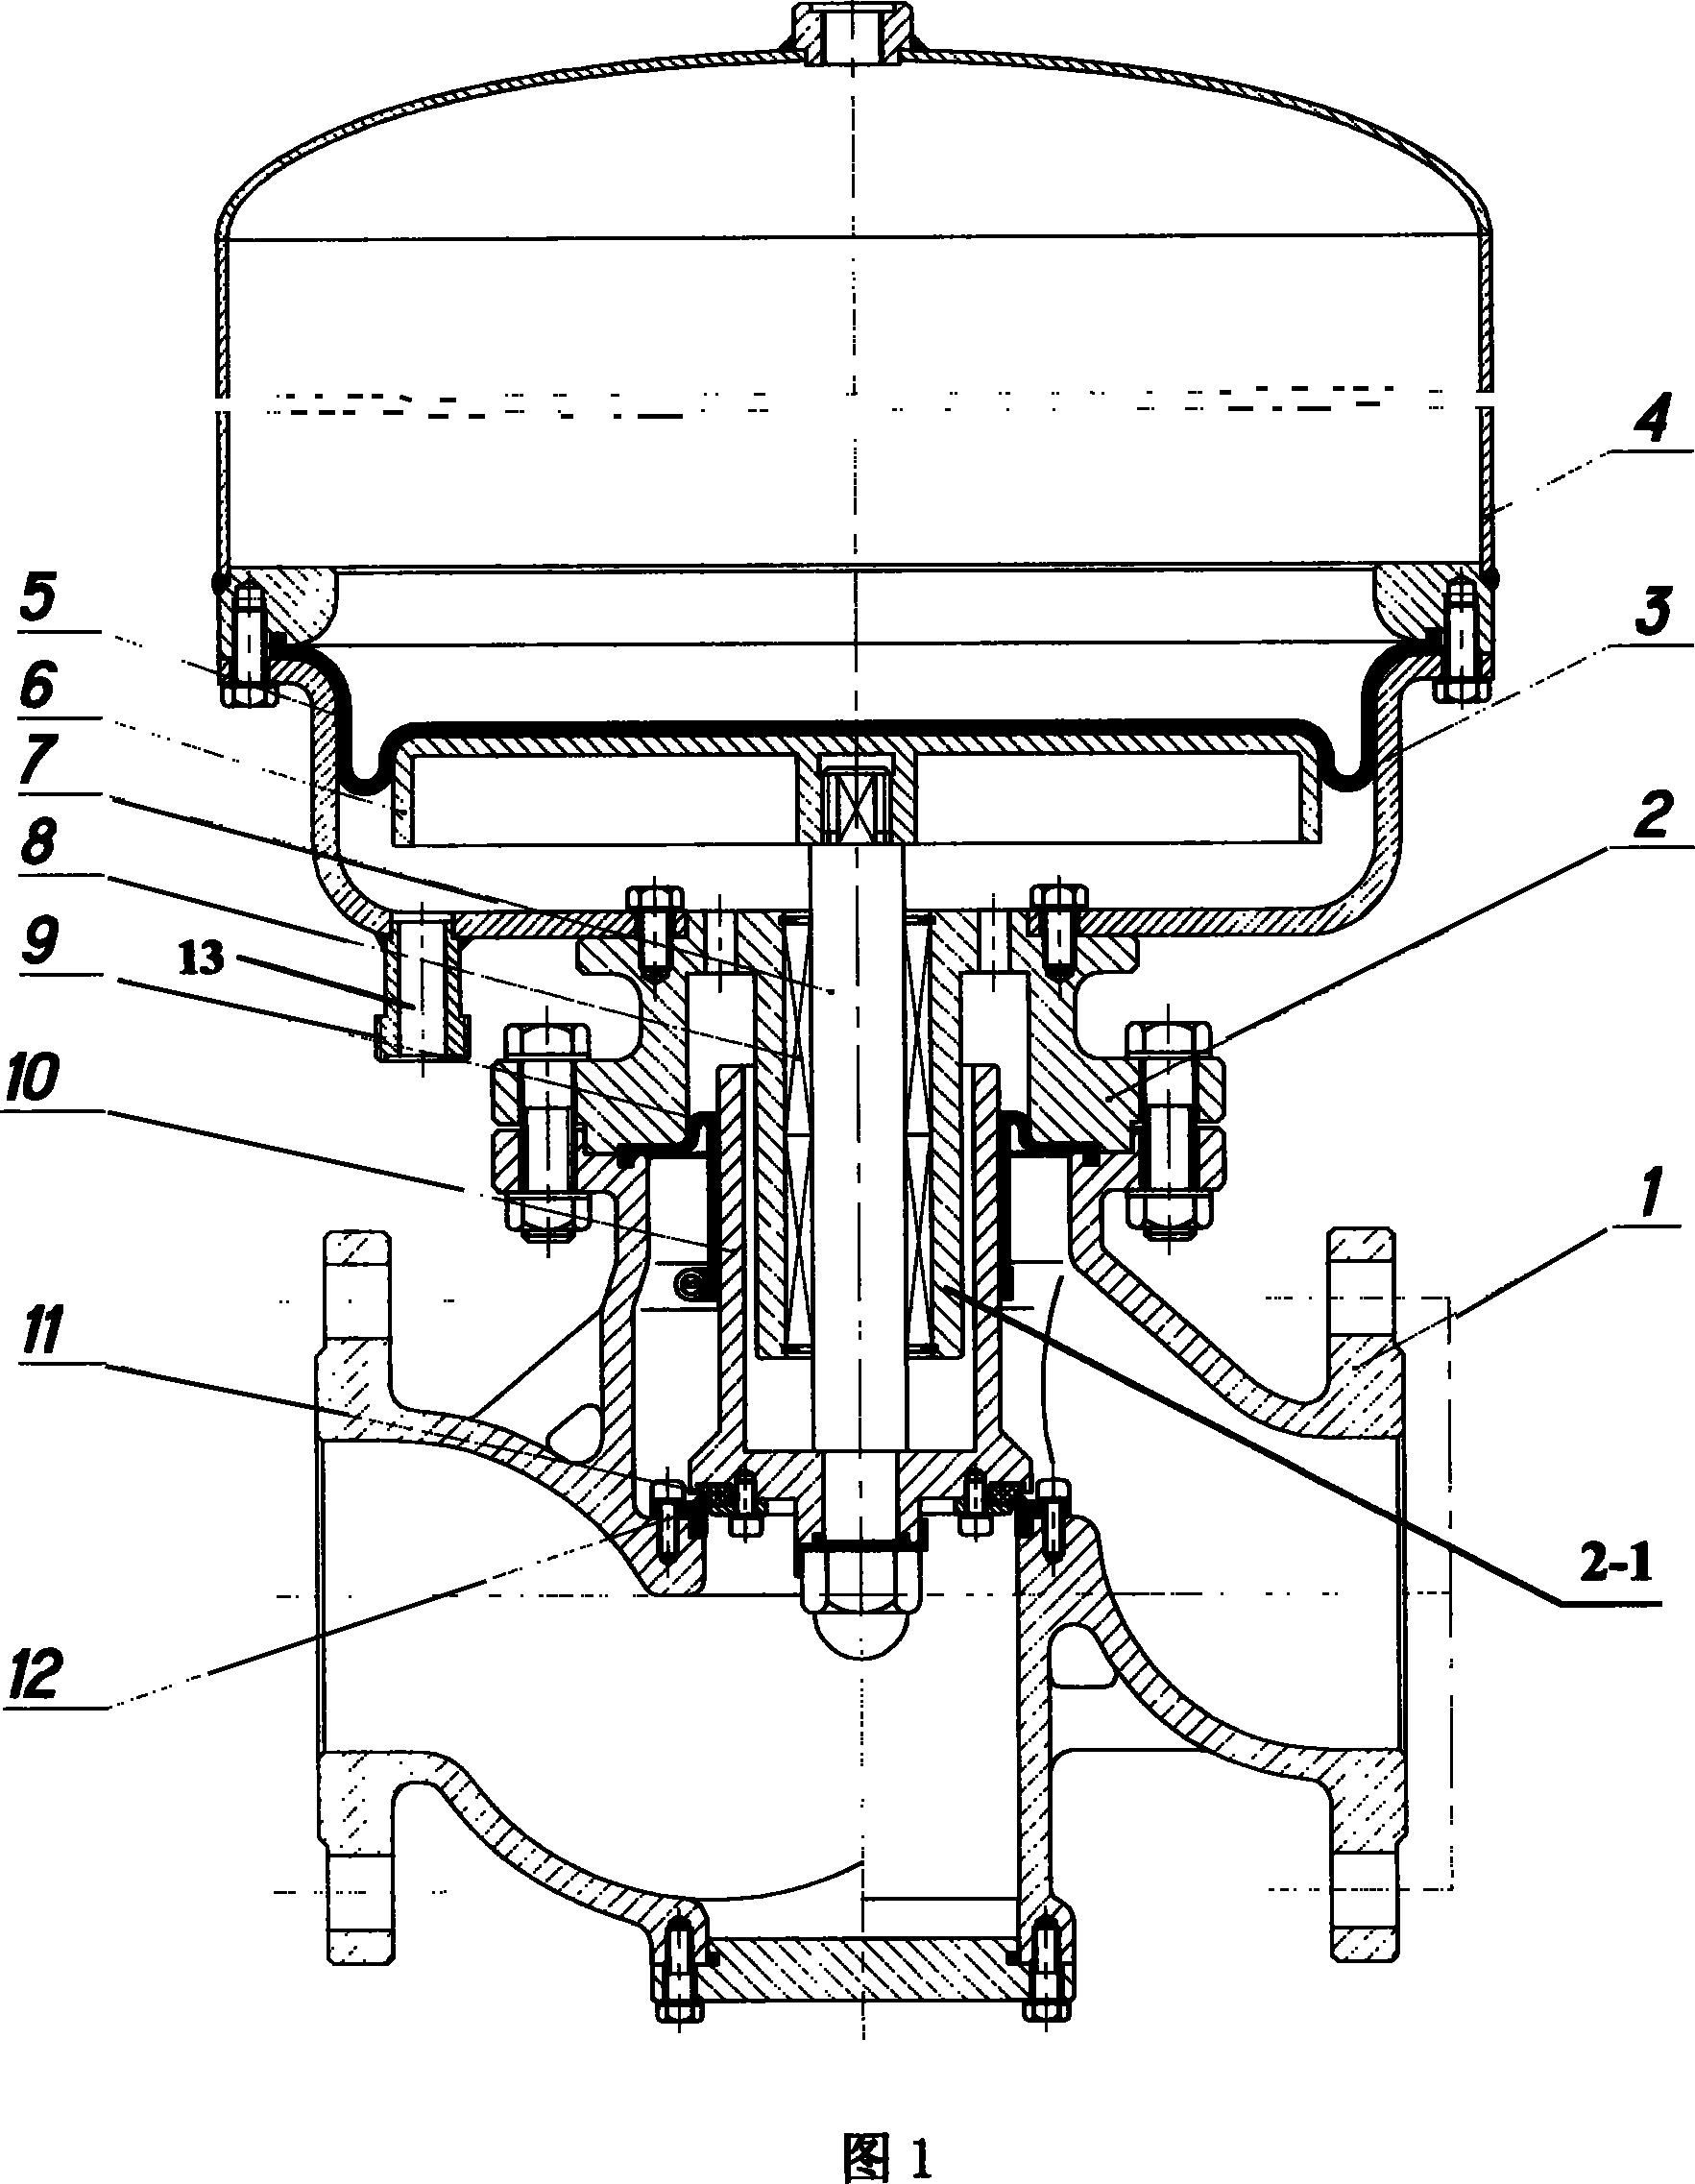 Mixing delivery over-flow valve